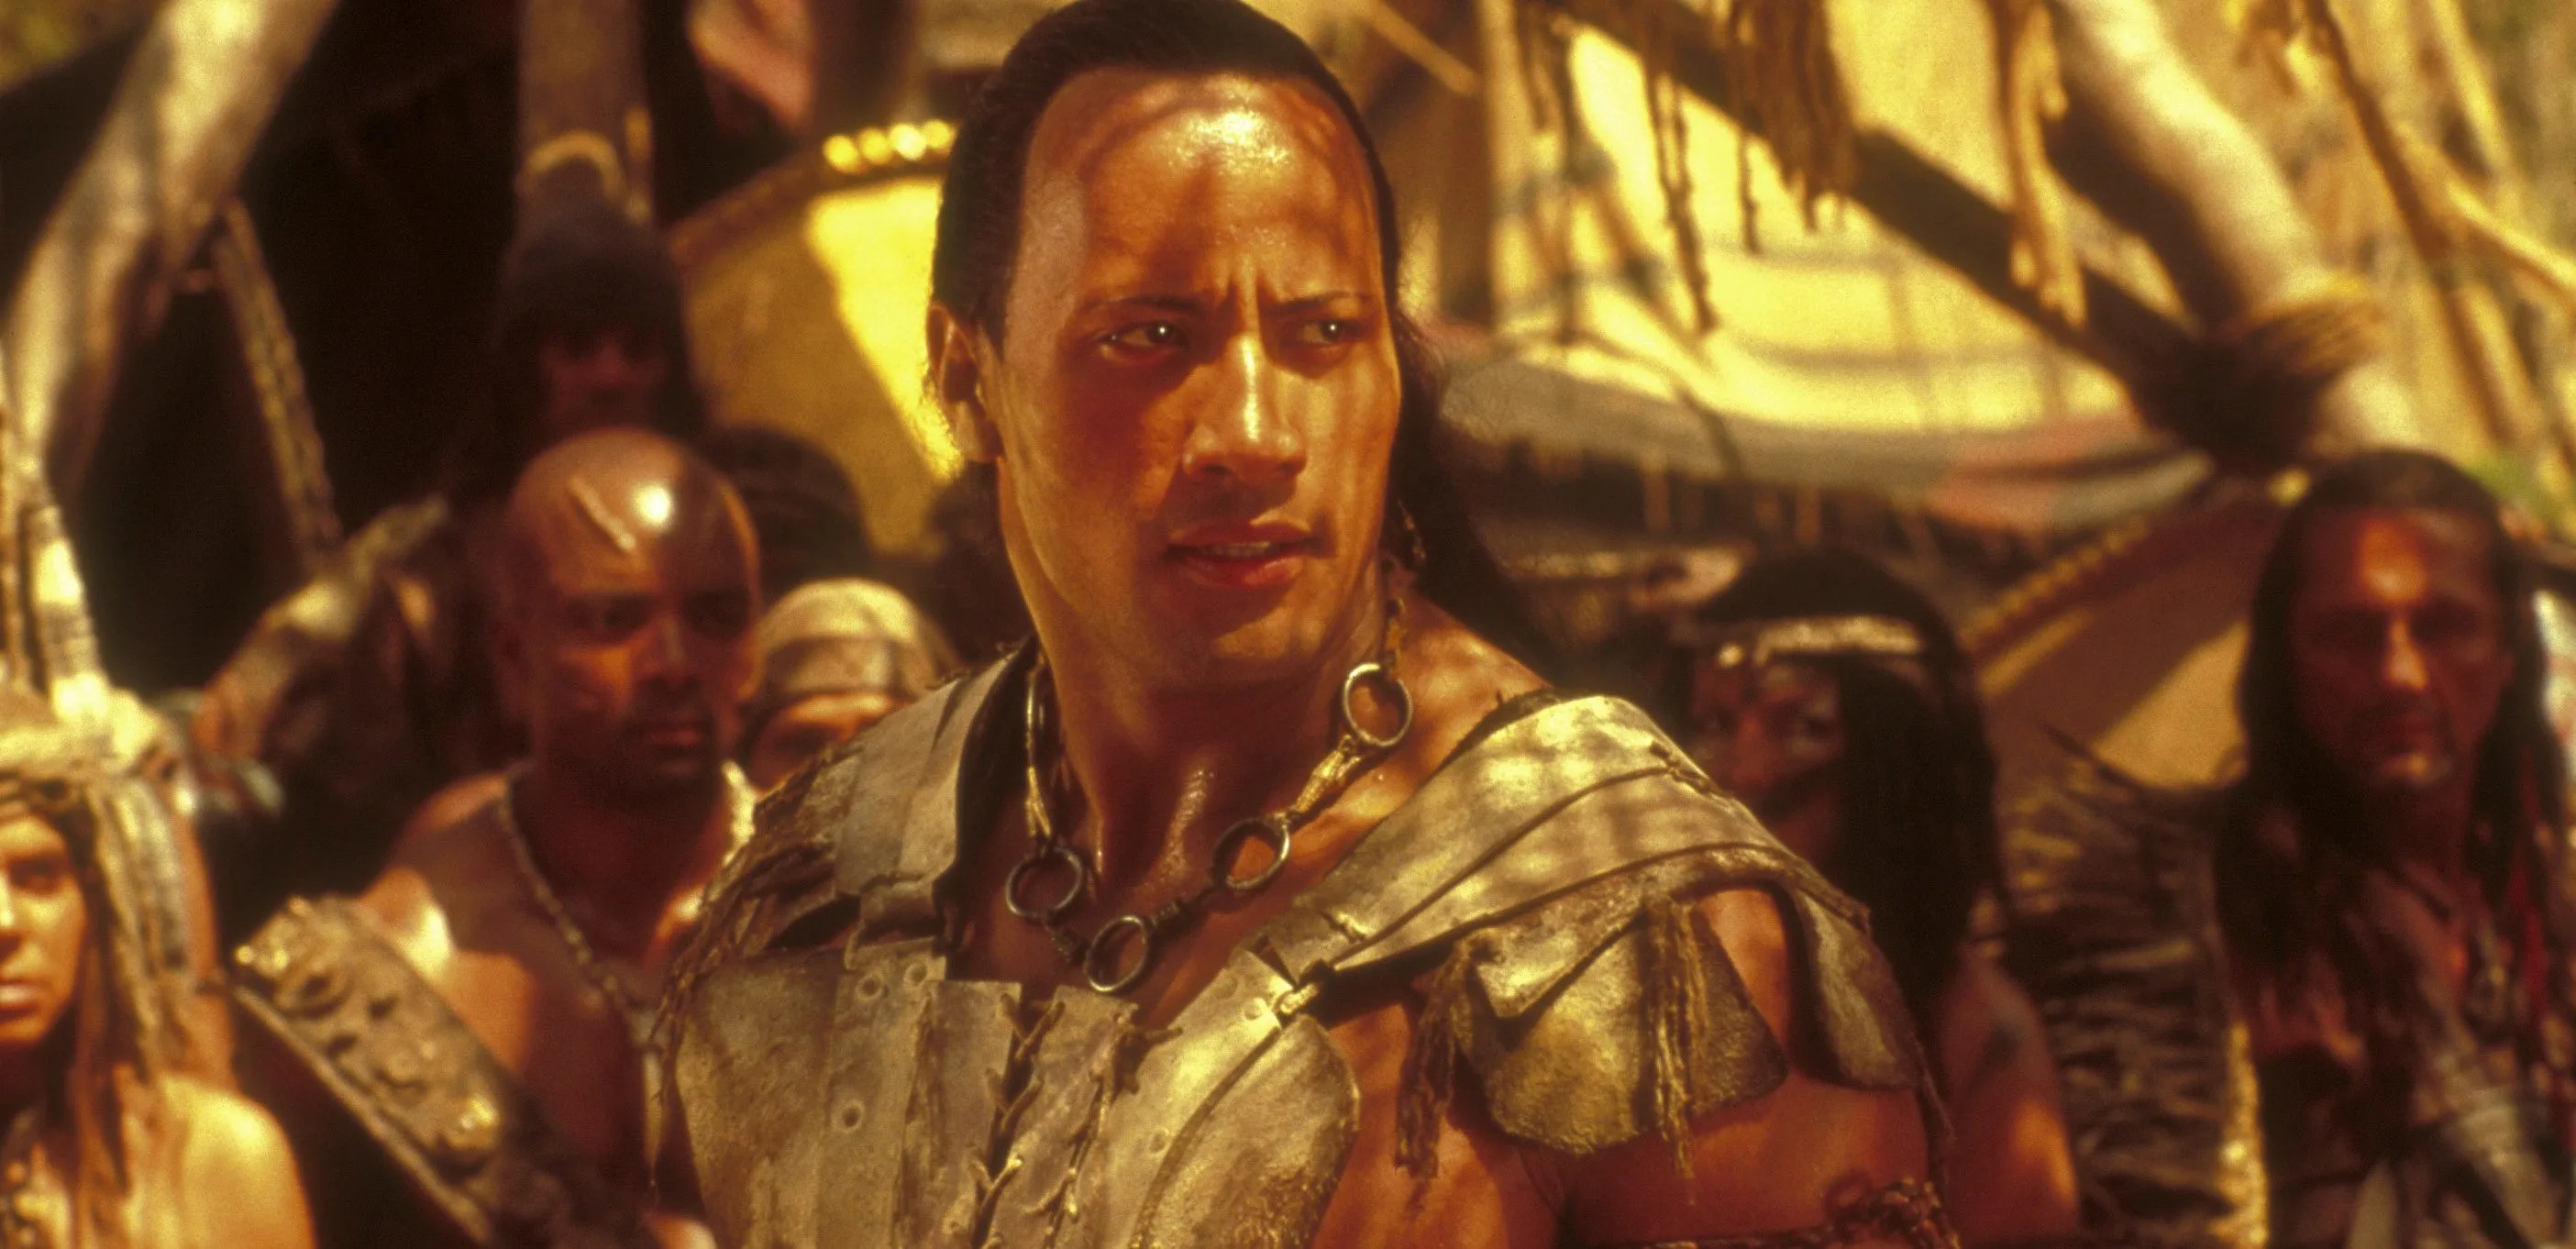 Dwayne Johnson (The Scorpion King): An American actor, film producer, and former professional wrestler, A film directed by Chuck Russell. 2810x1370 Dual Screen Background.